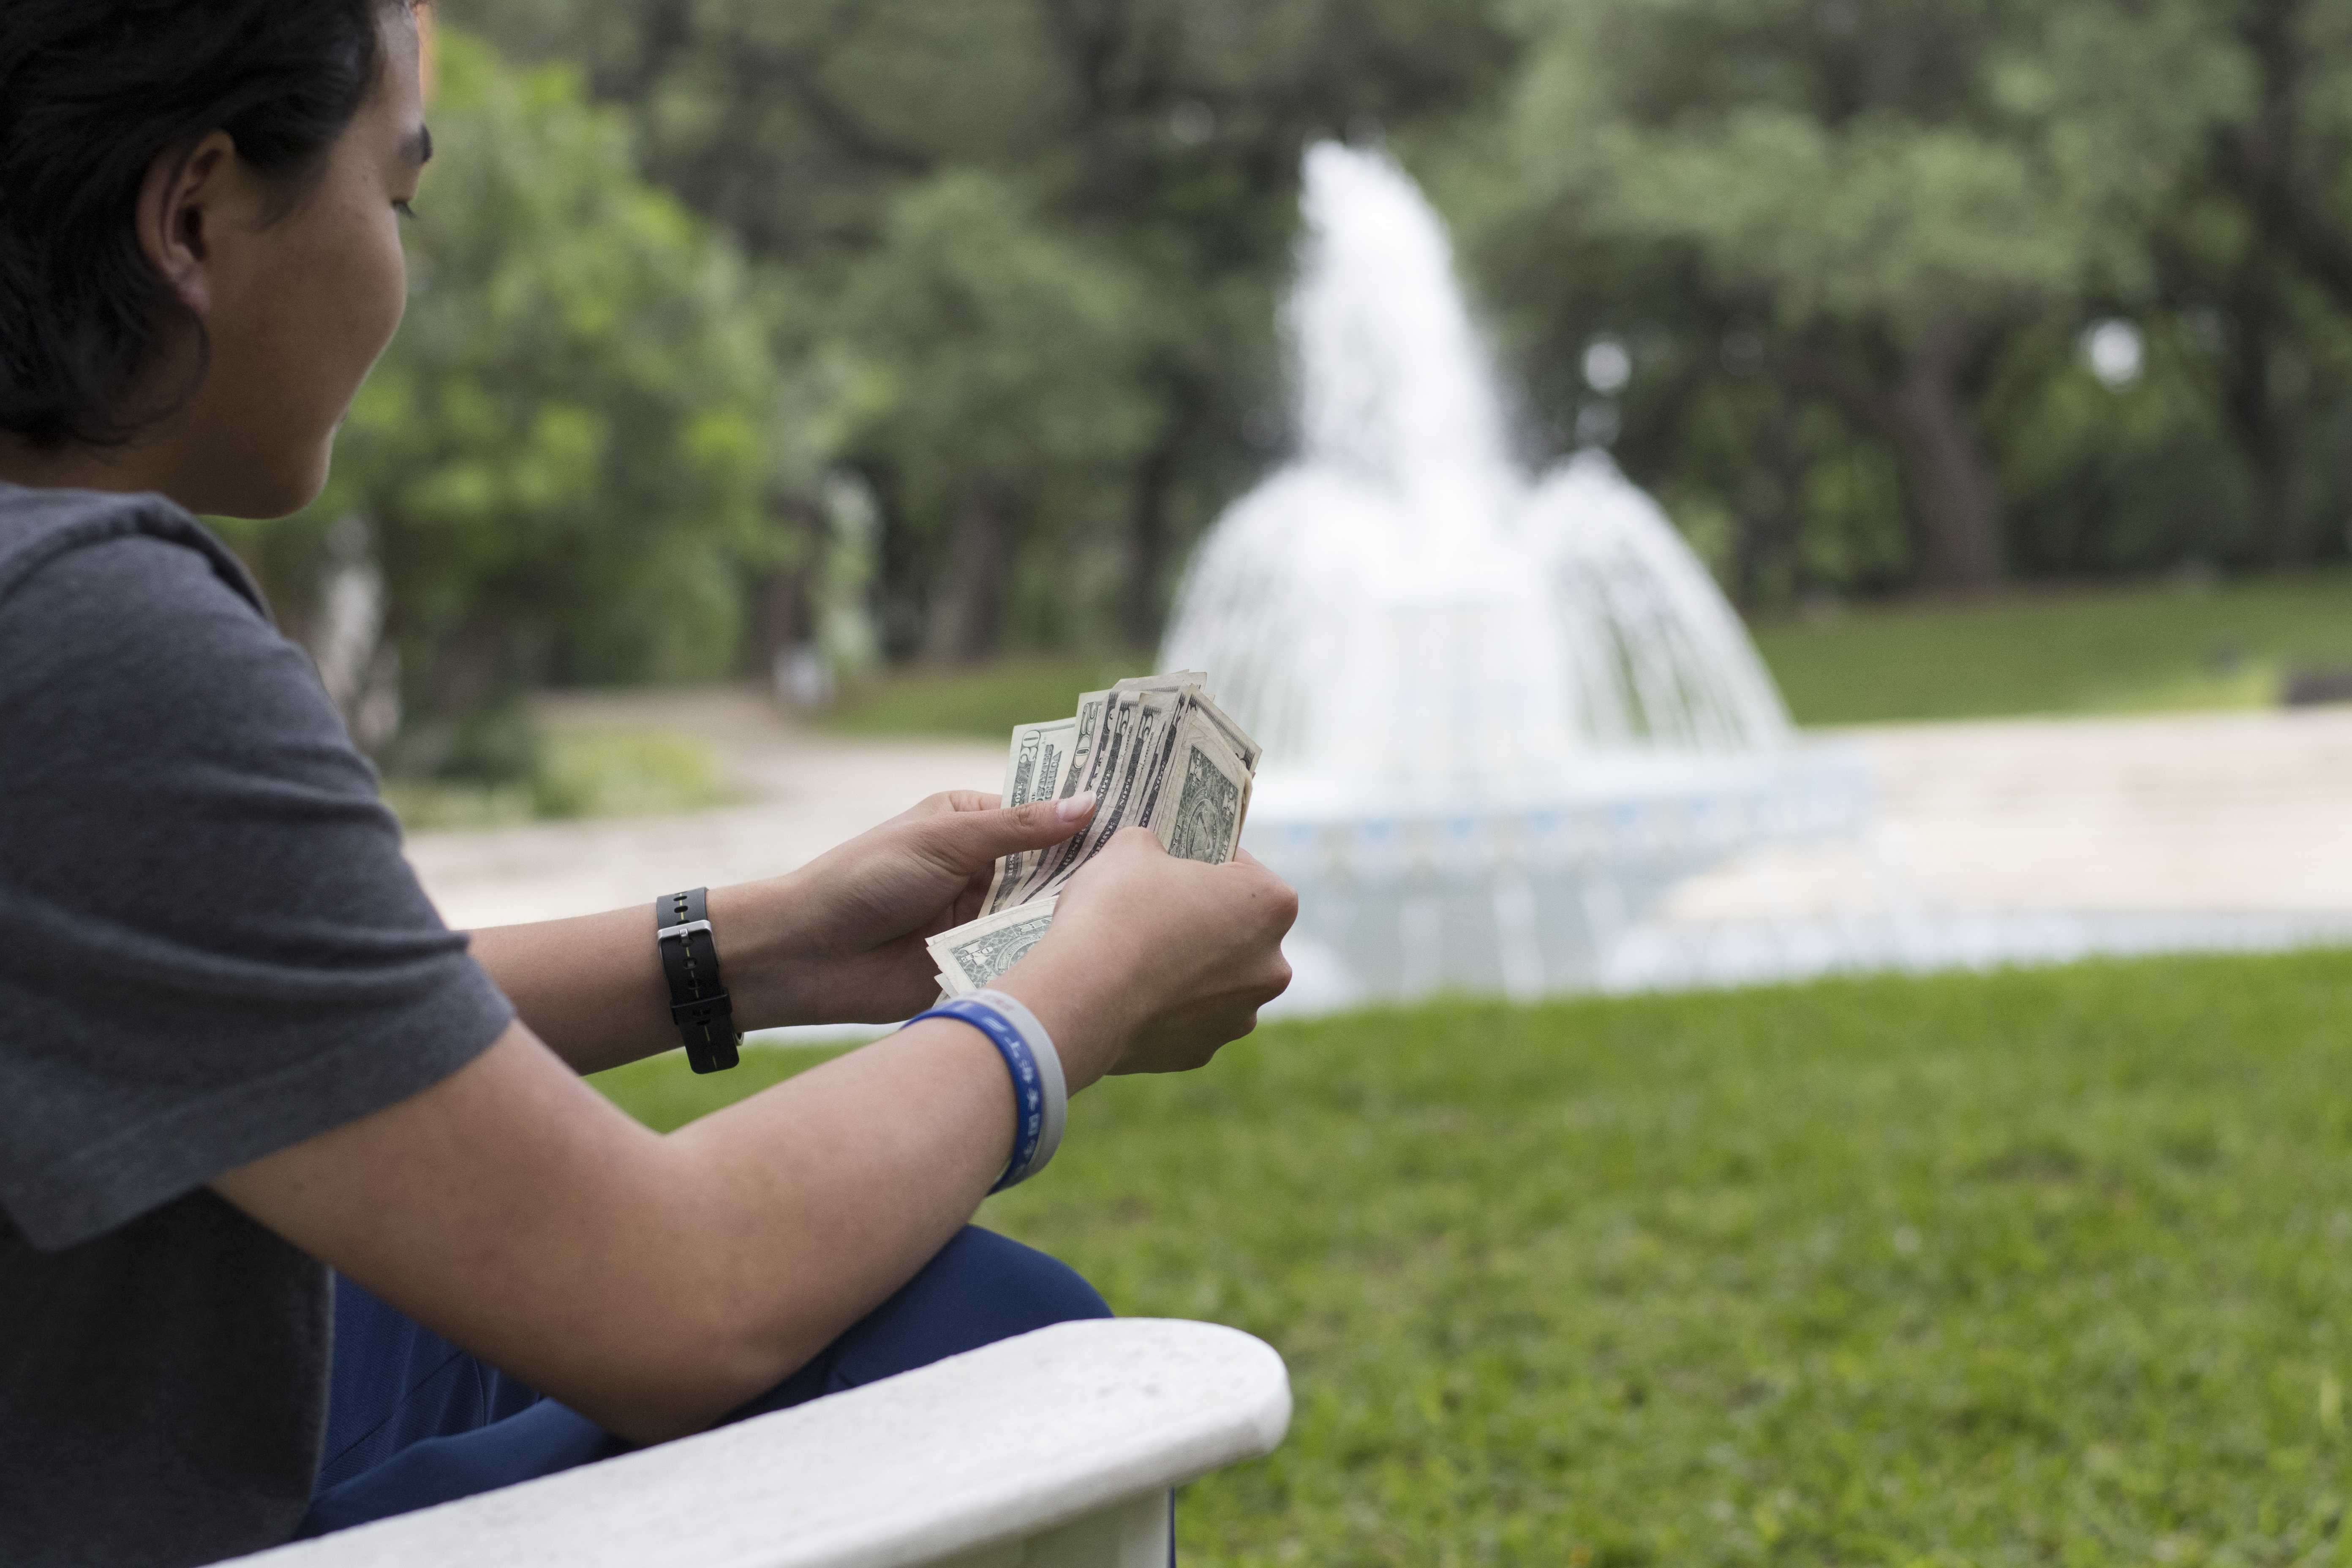 Strategic Communications and Marketing pays students for studying by fountain